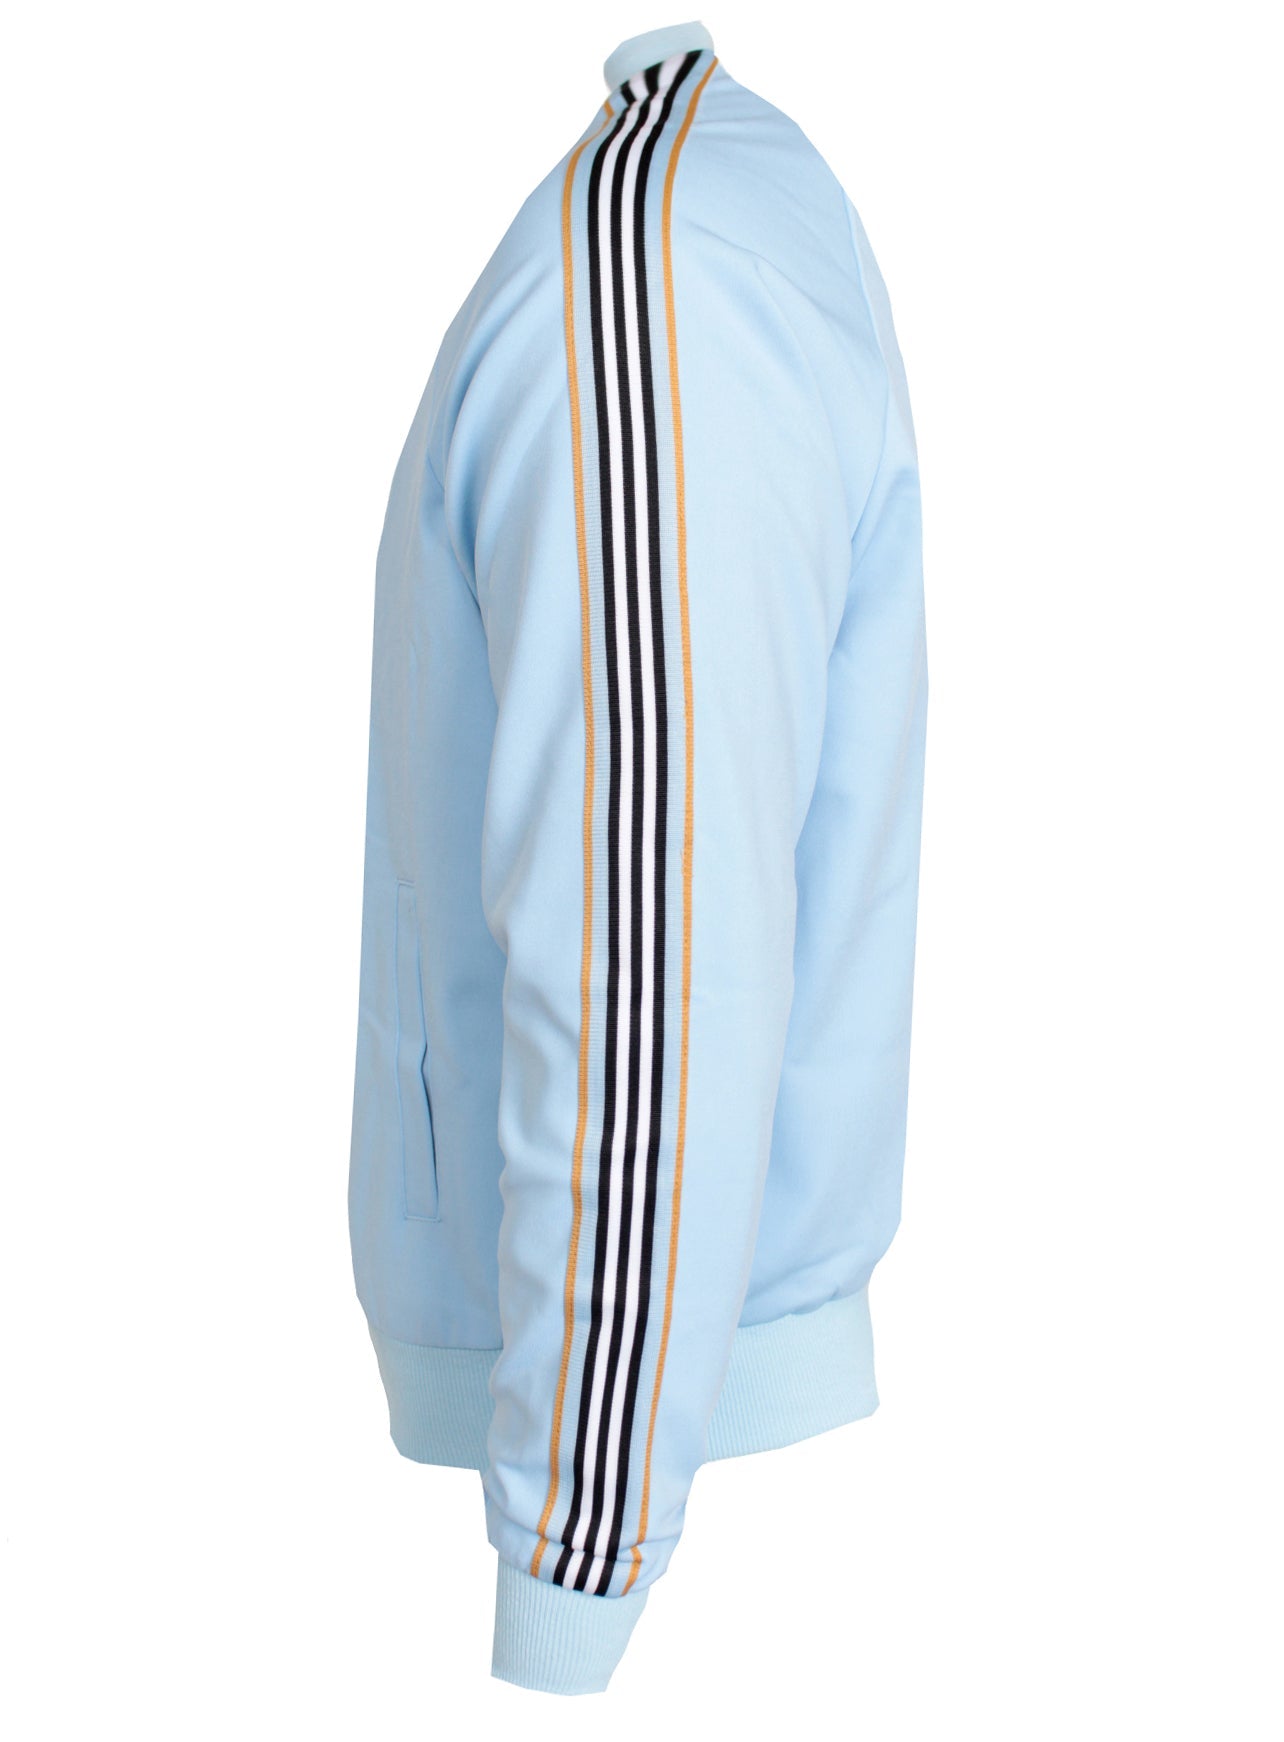 Men's Long Sleeve Ice Cream Cone Track Jacket with Side Stripes-Sky Blue